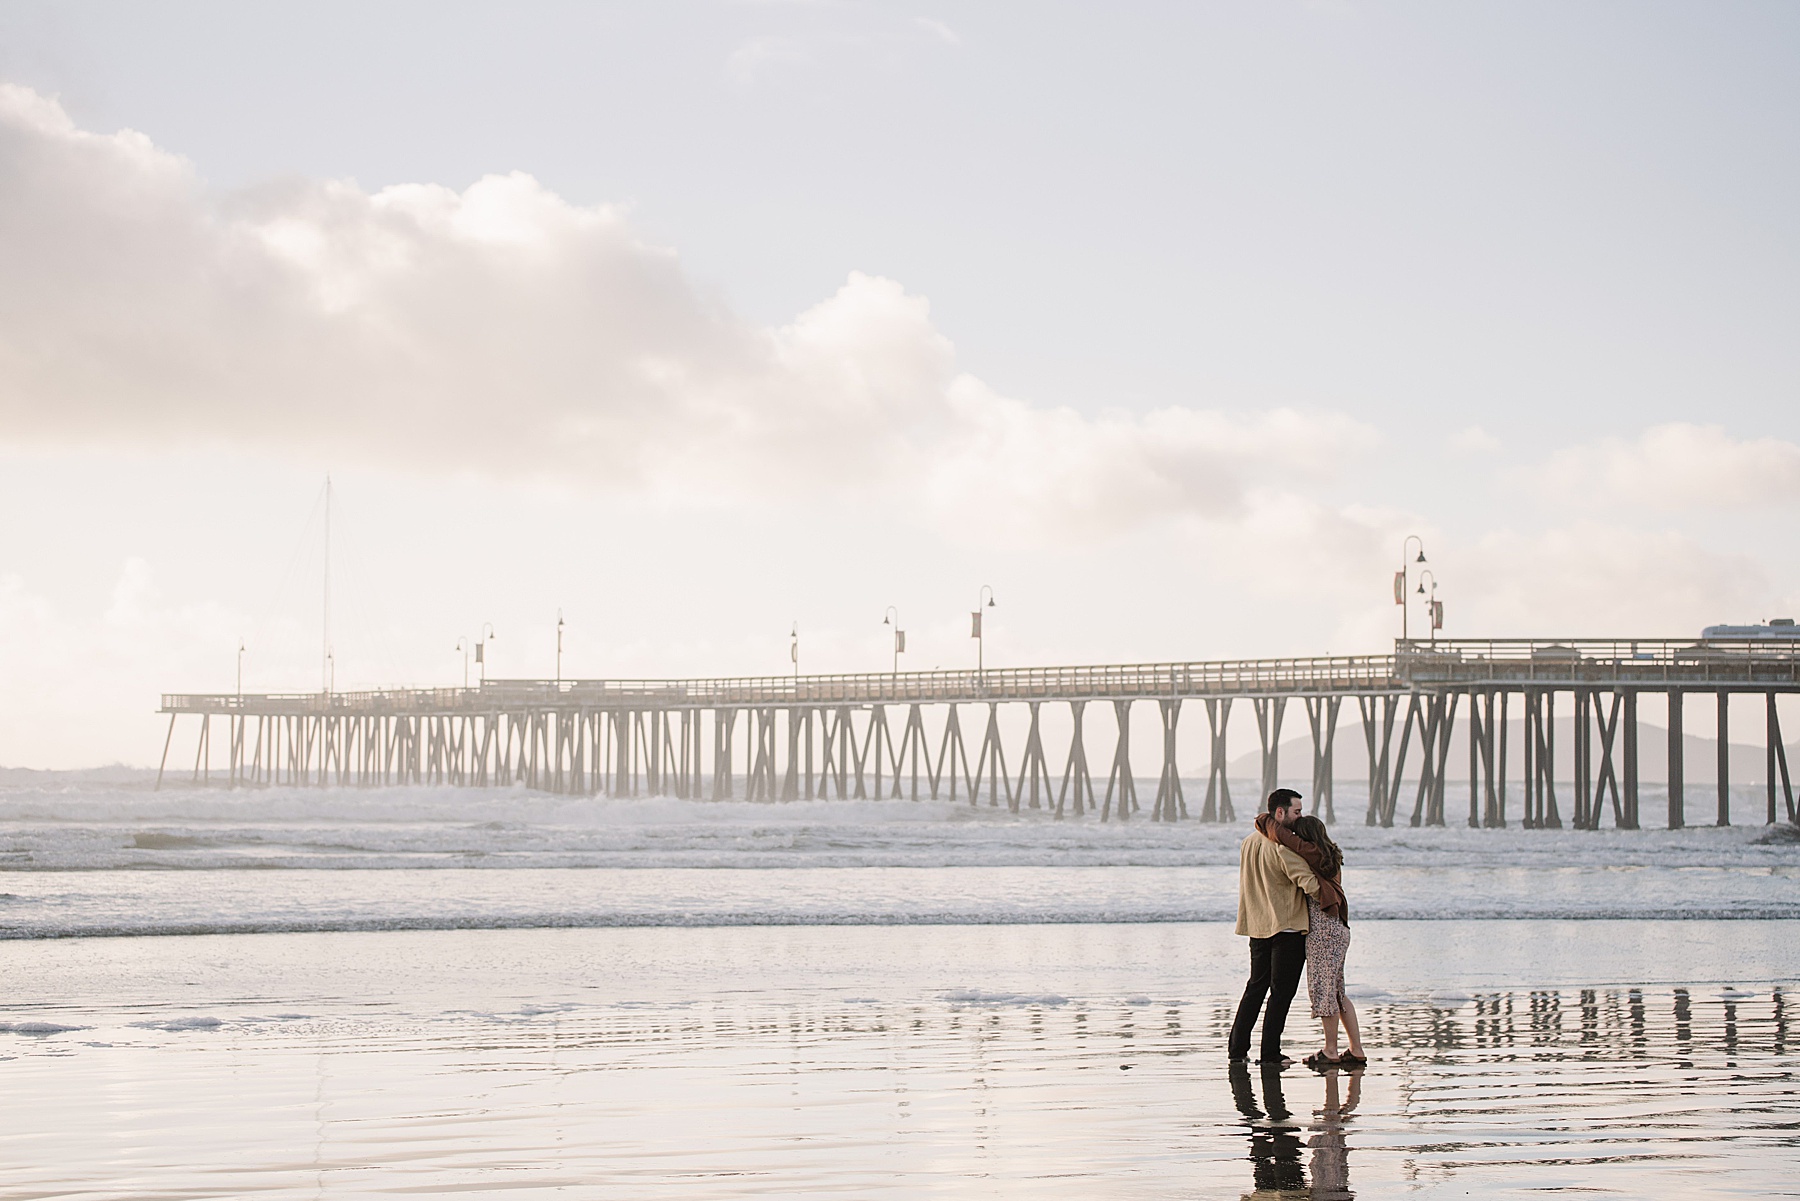 Nikkels Photography, a California Central Coast Photographer, shares 10 tips for Planning a Proposal Photoshoot.